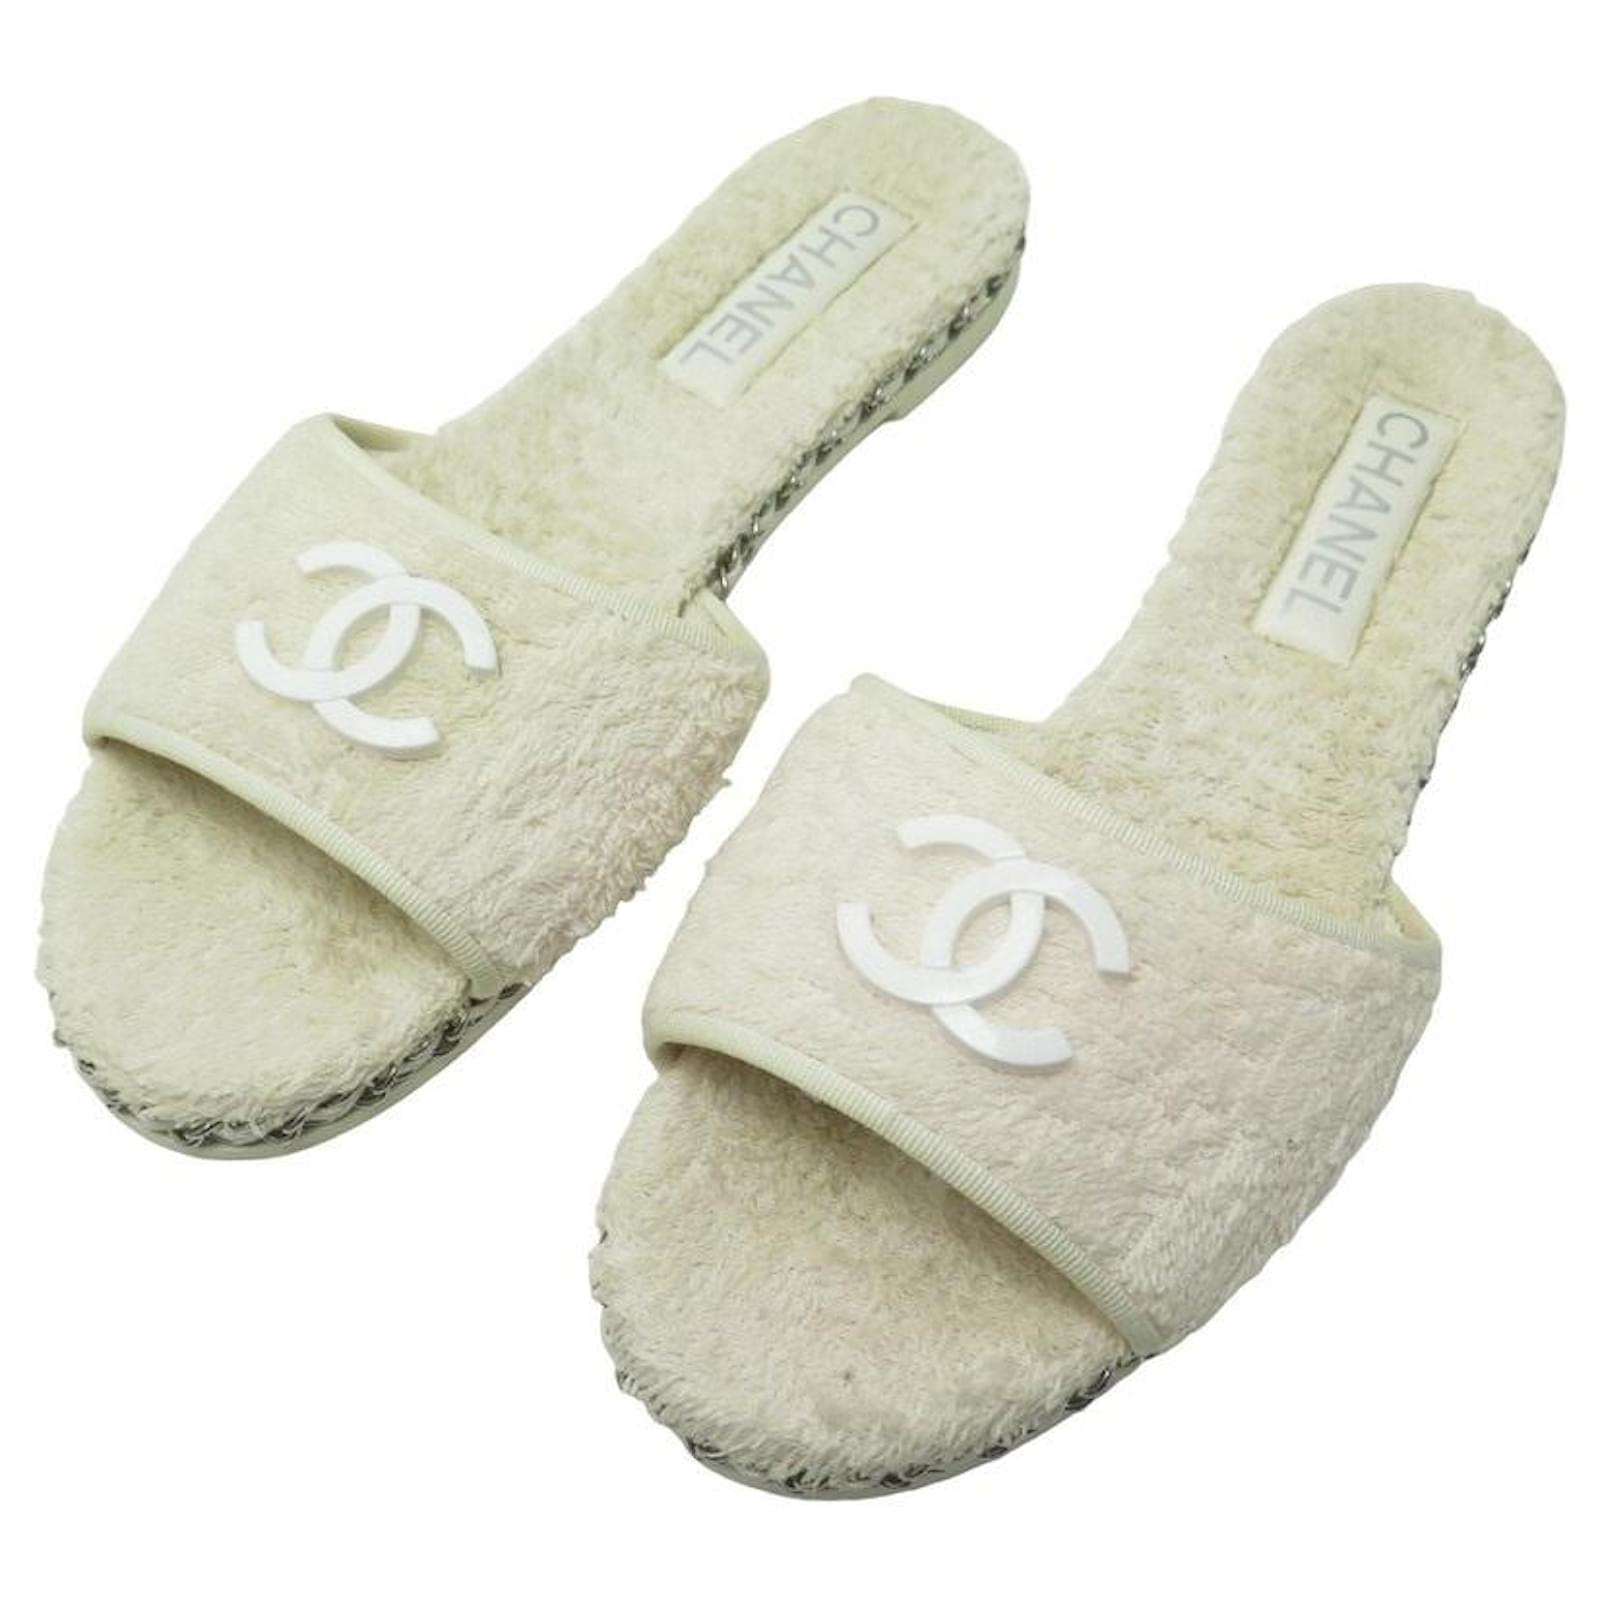 CHANEL SHOES MULES SANDALS IN TERRY CLOTH 40 BLANC WHITE SANDALS